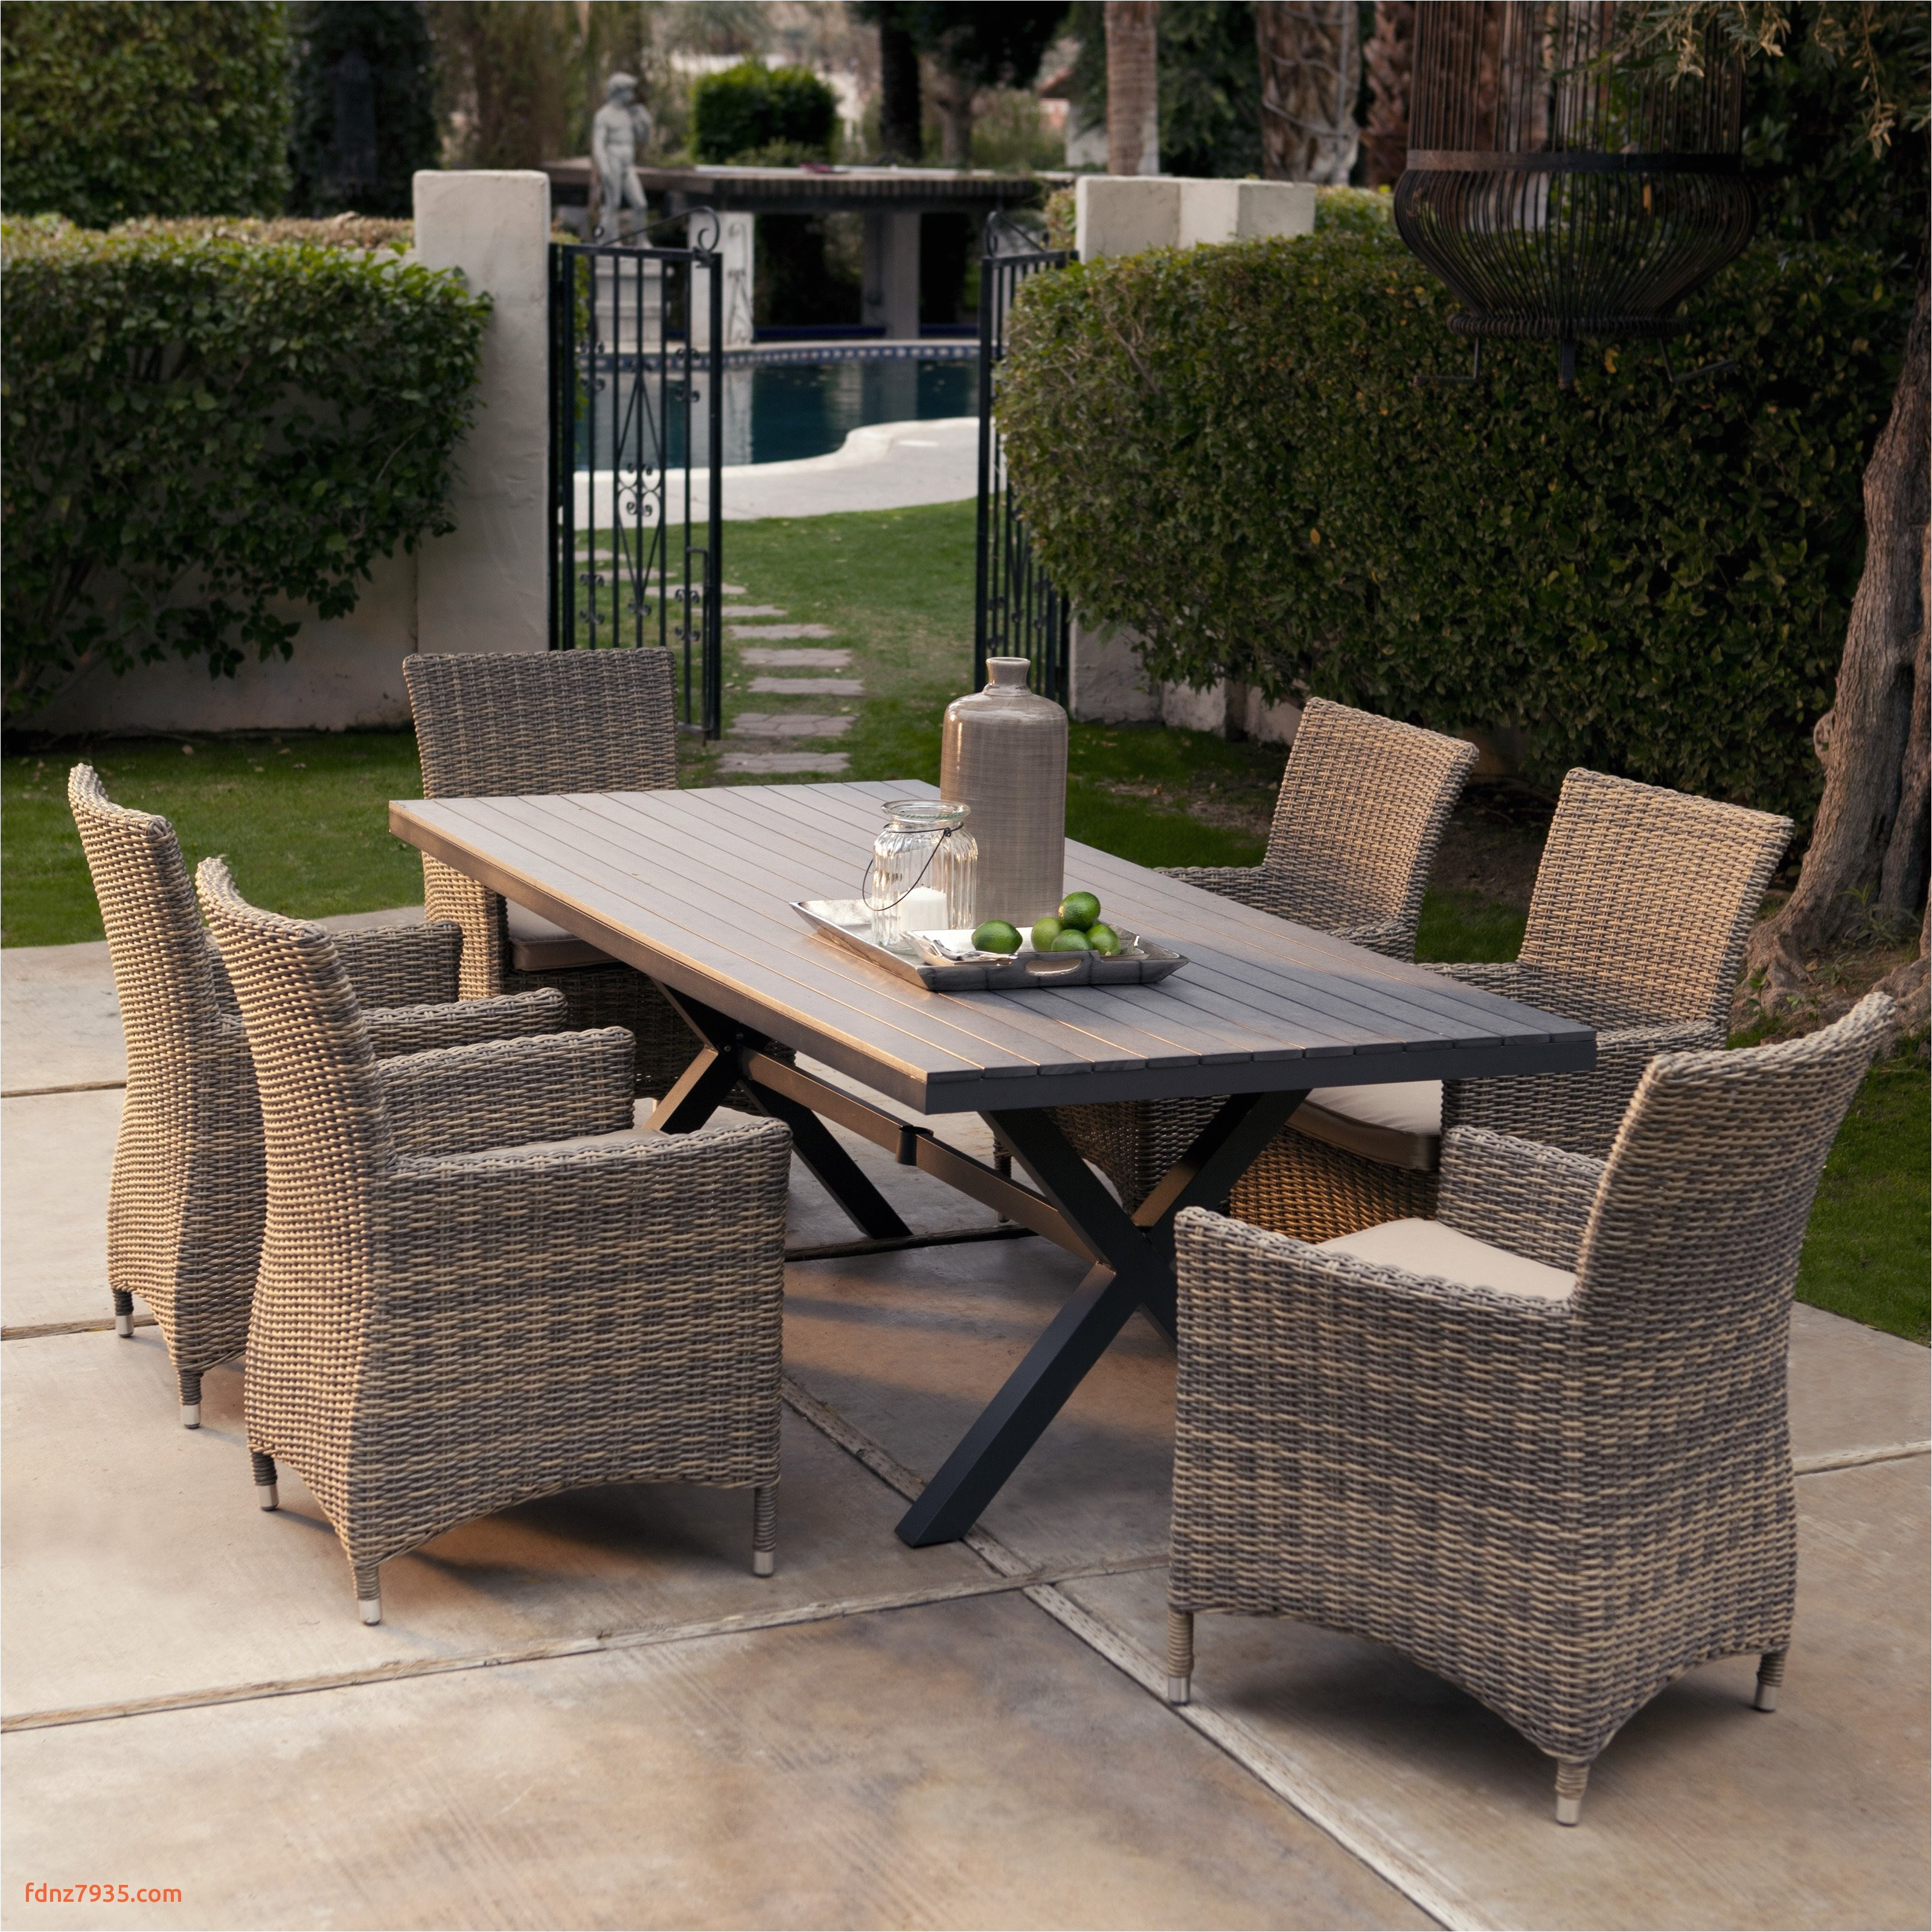 diy outdoor dining table unique chair outdoor patio furniture marvellous wicker outdoor sofa 0d